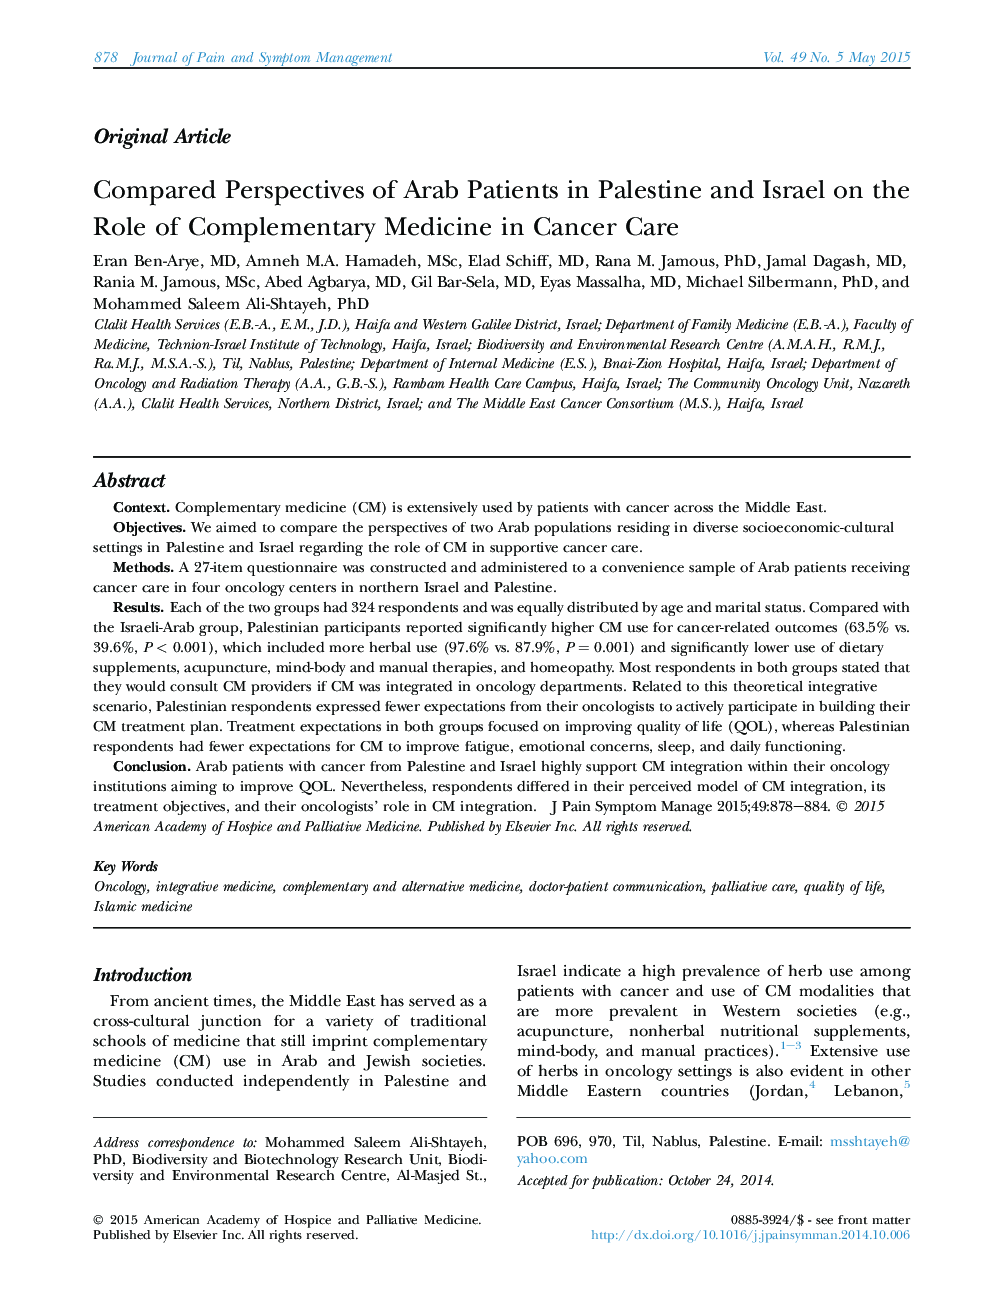 Original ArticleCompared Perspectives of Arab Patients in Palestine and Israel on the Role of Complementary Medicine in Cancer Care